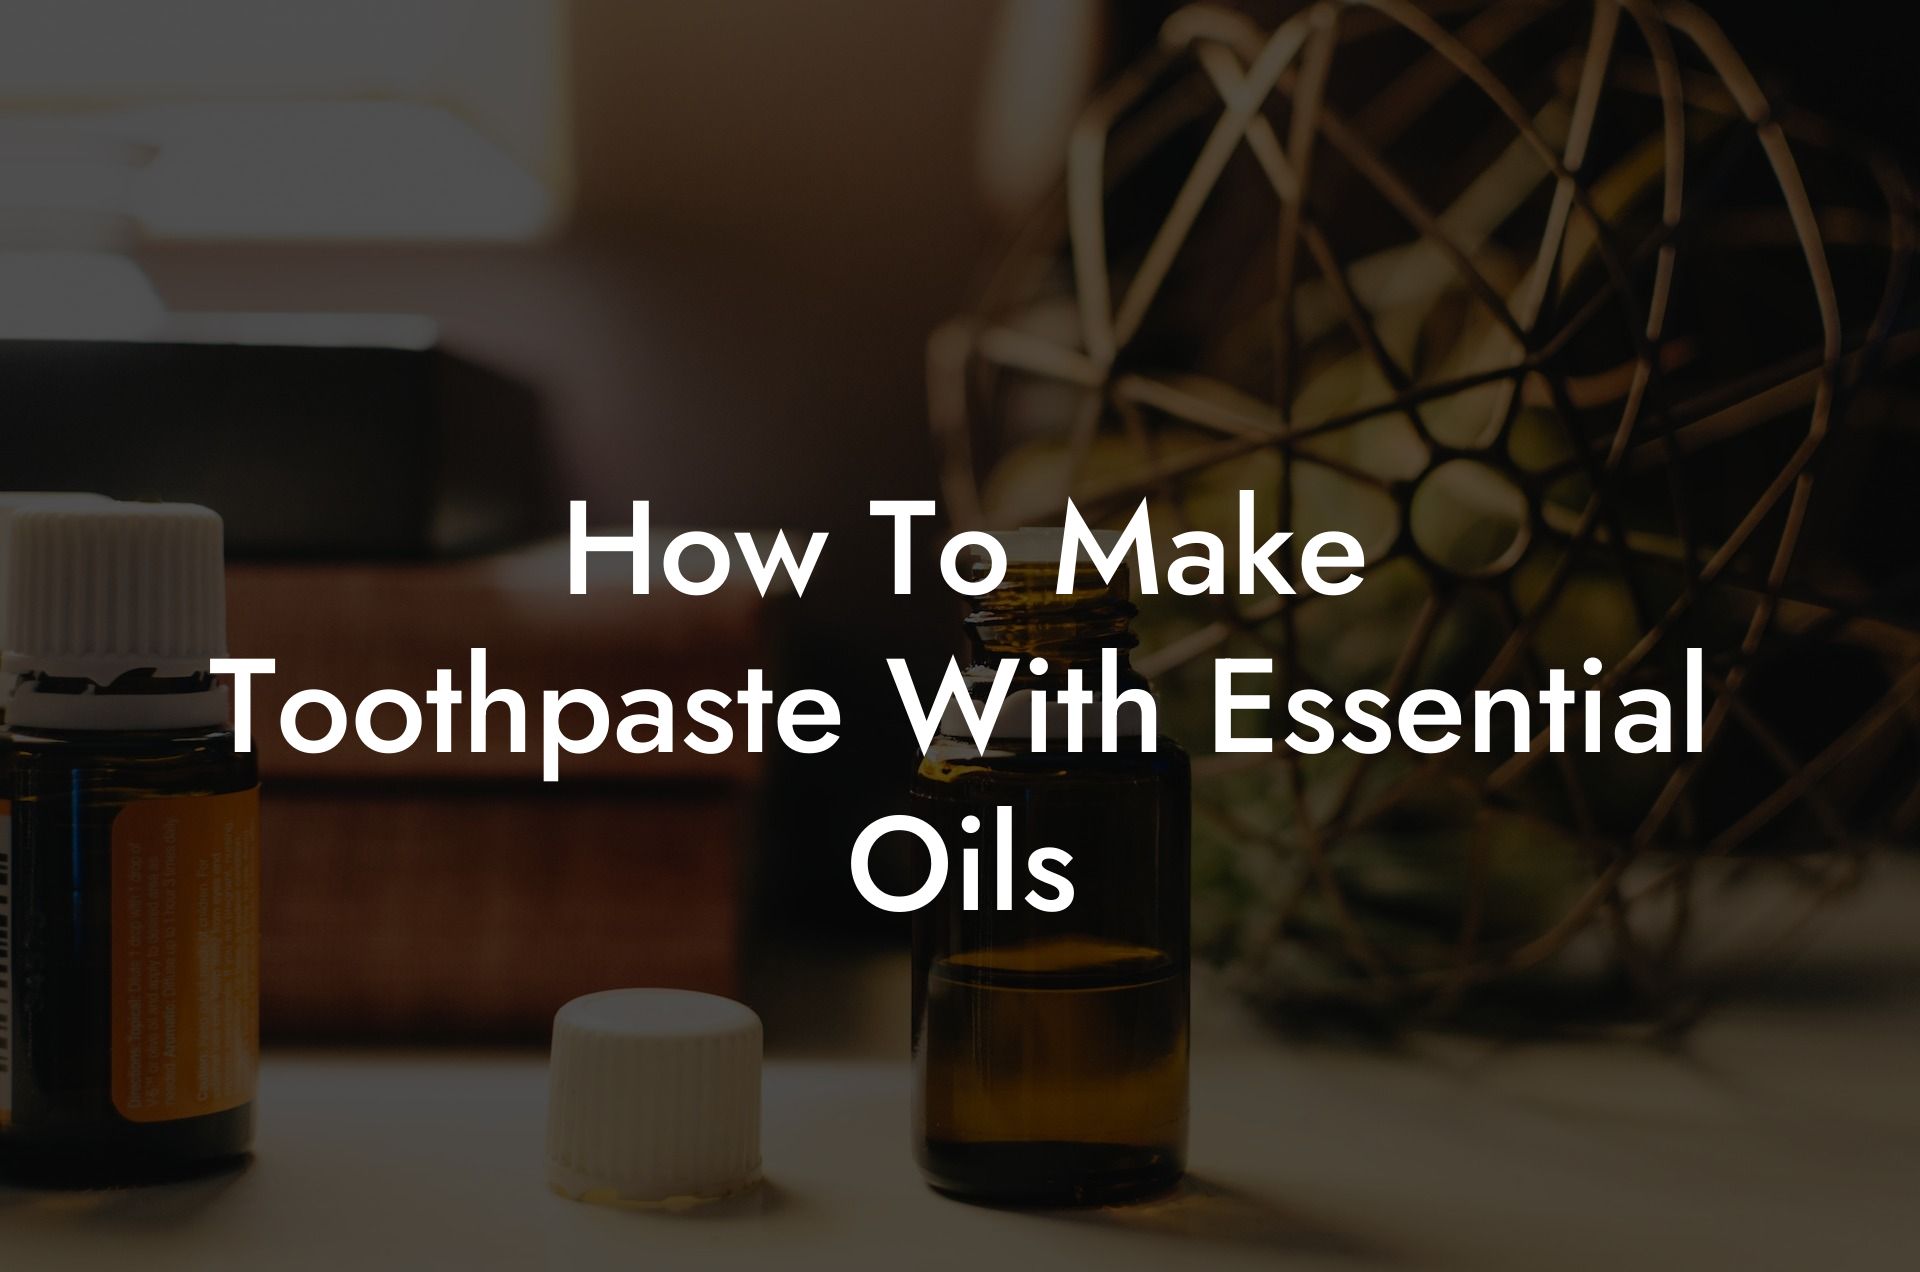 How To Make Toothpaste With Essential Oils